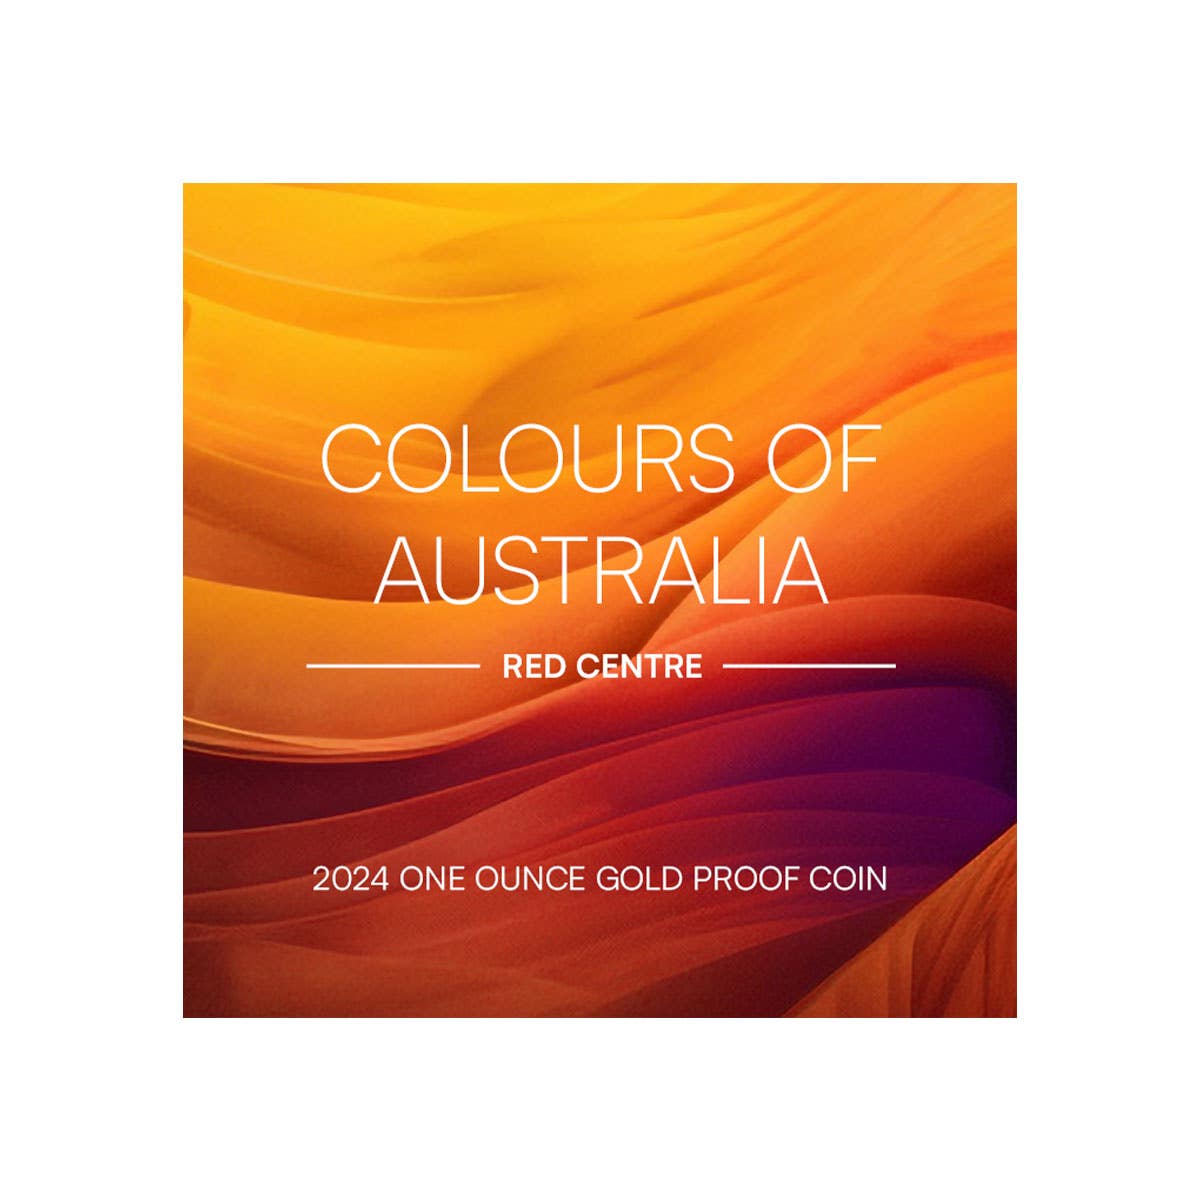 Colours of Australia 2024 $100 Red Centre 1oz Gold Proof Coin